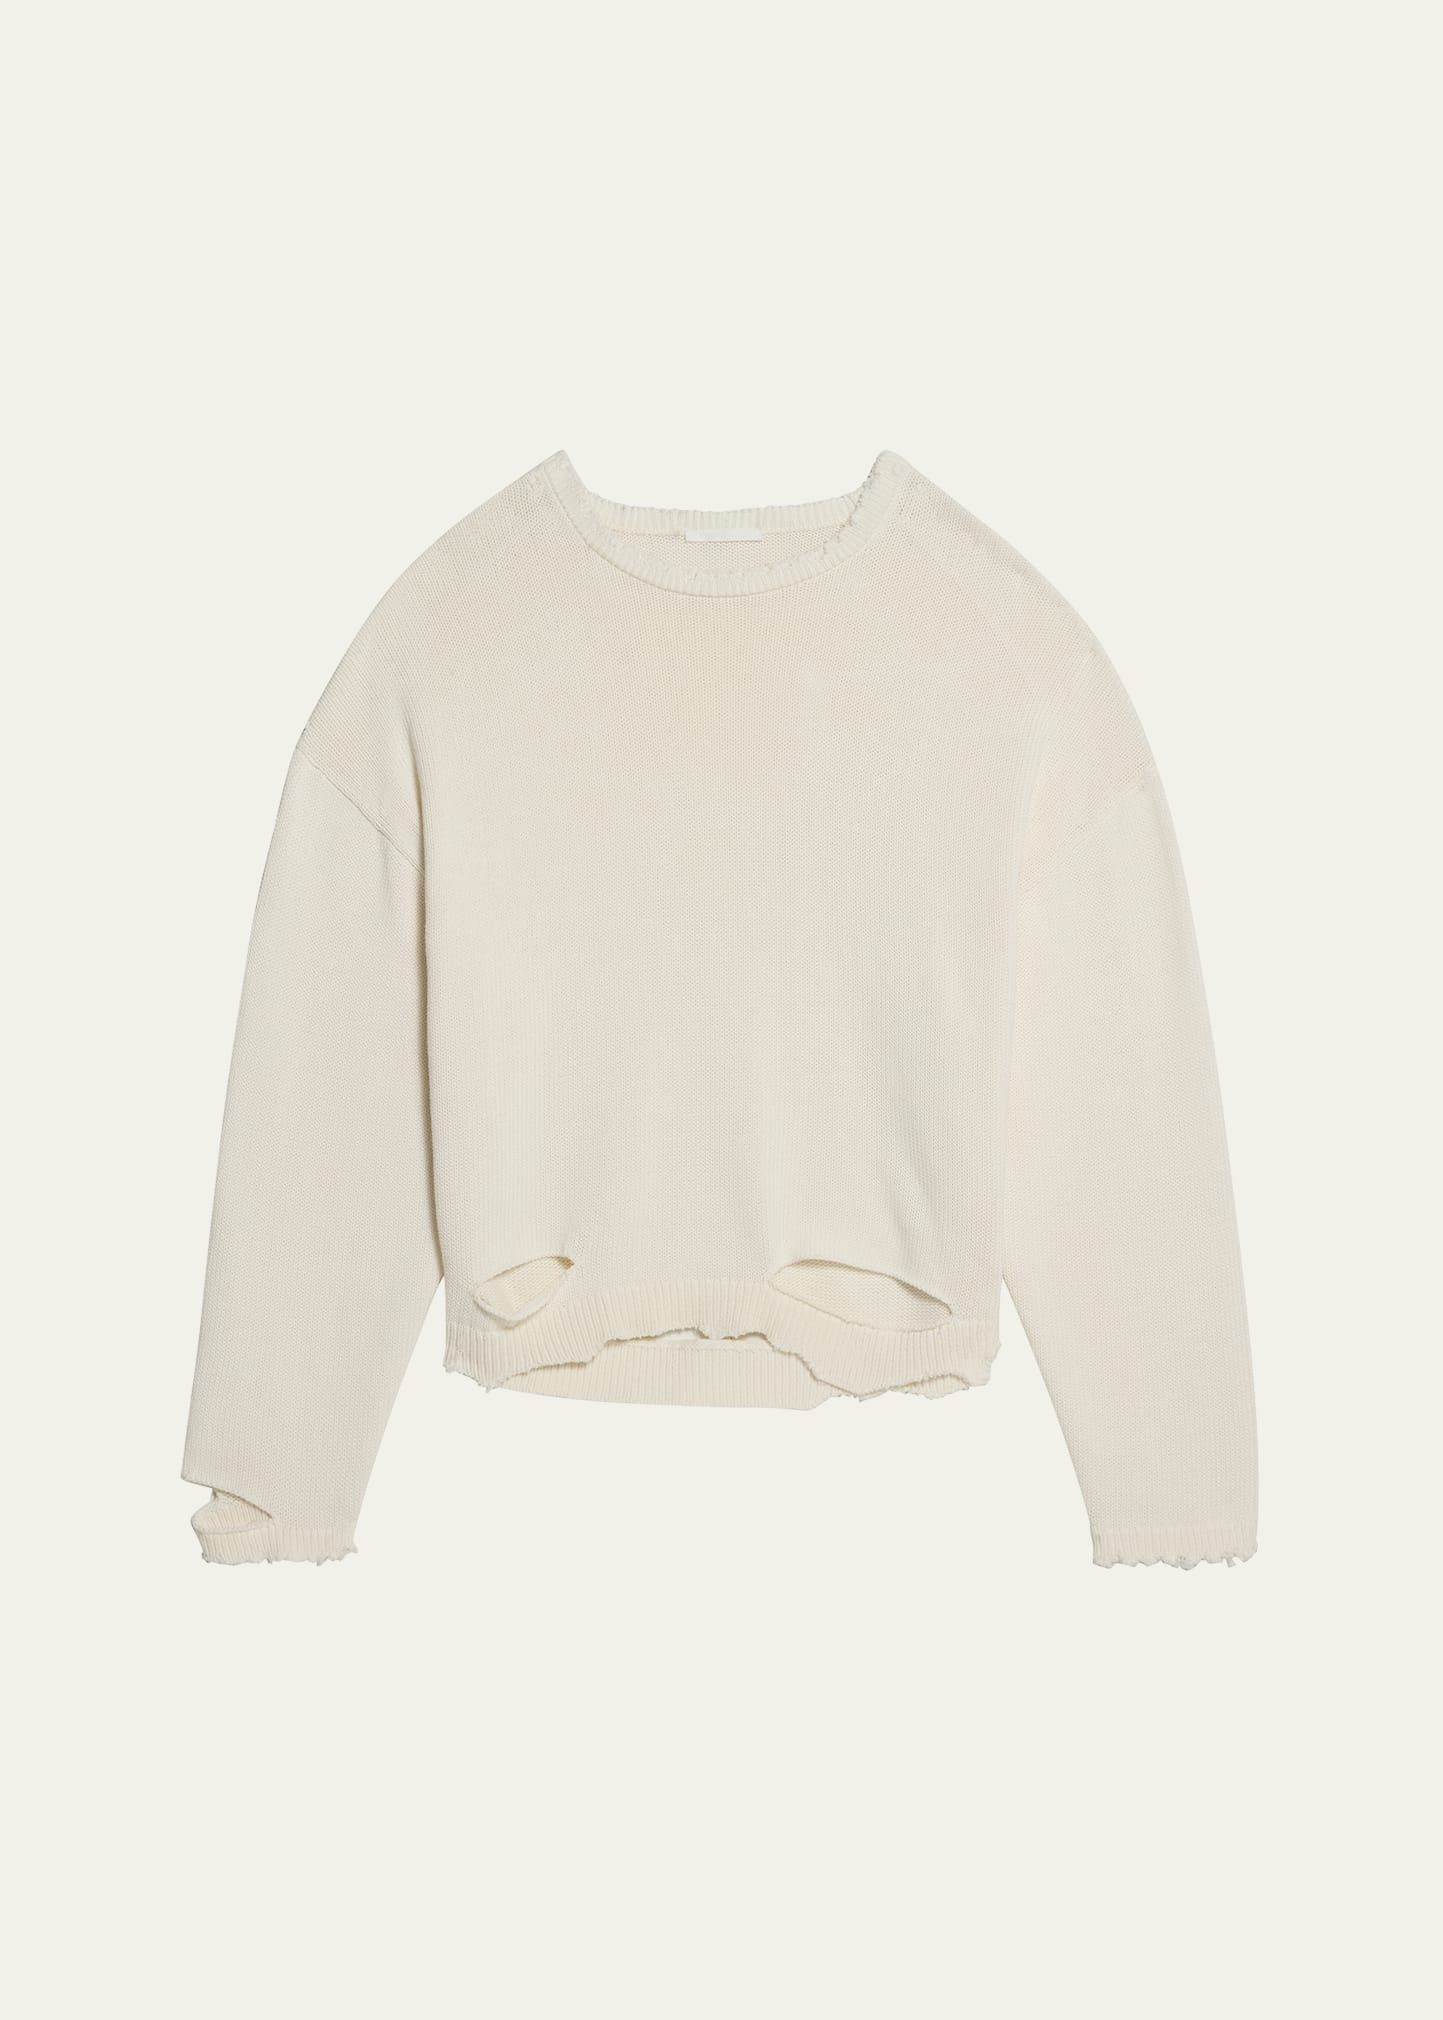 Helmut Lang Men's Distressed Crew Sweater In Neutral